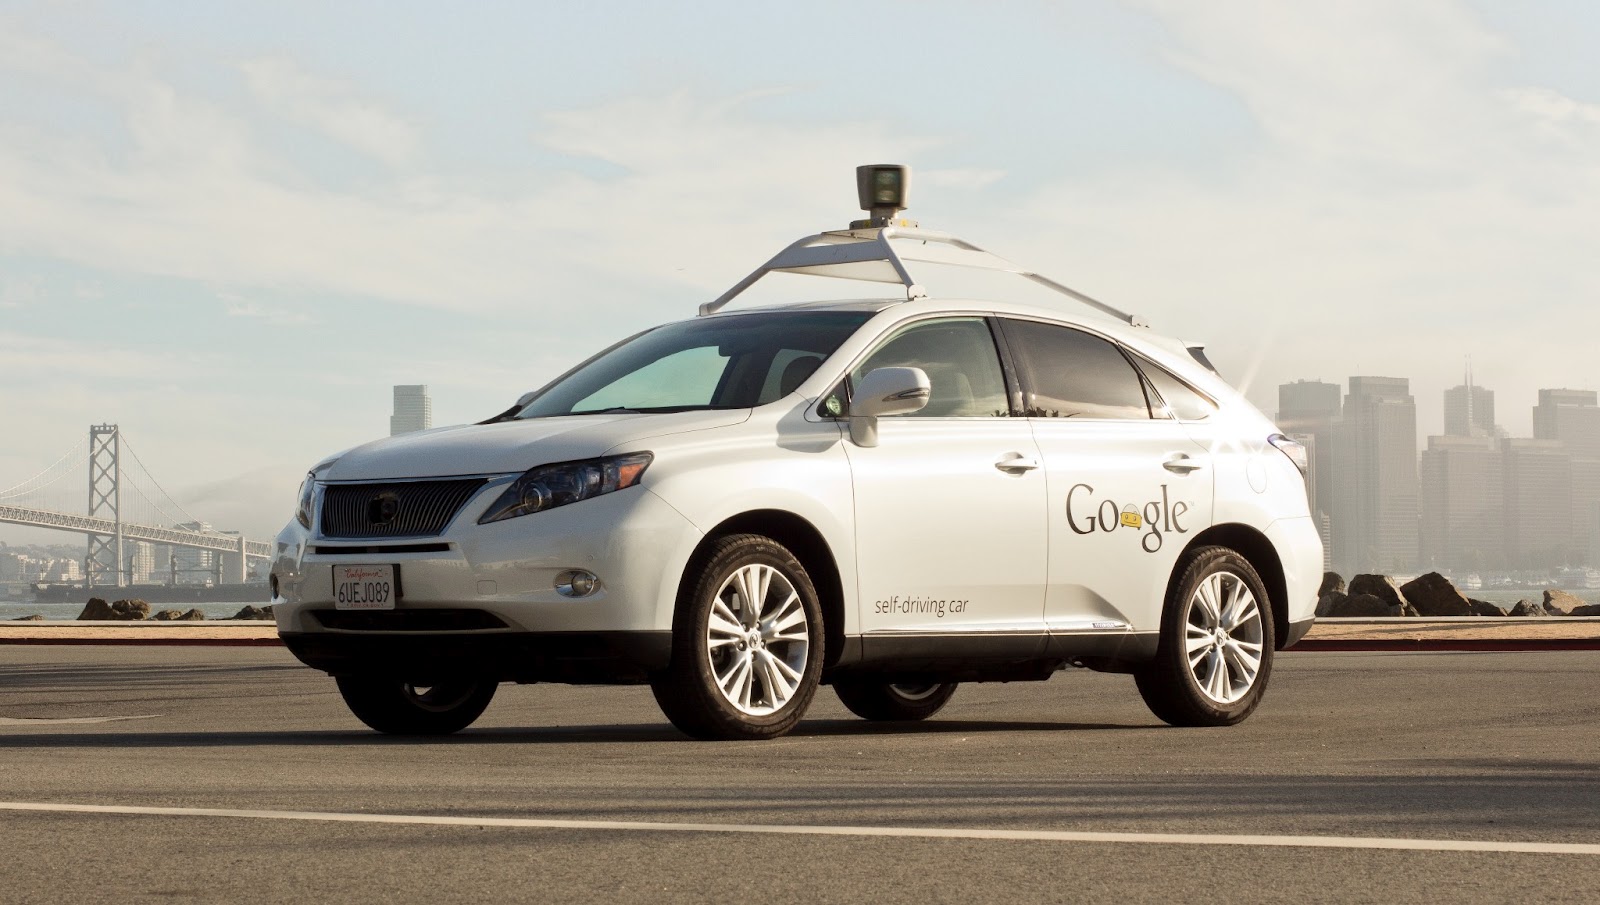 One of Google's self-driving cars